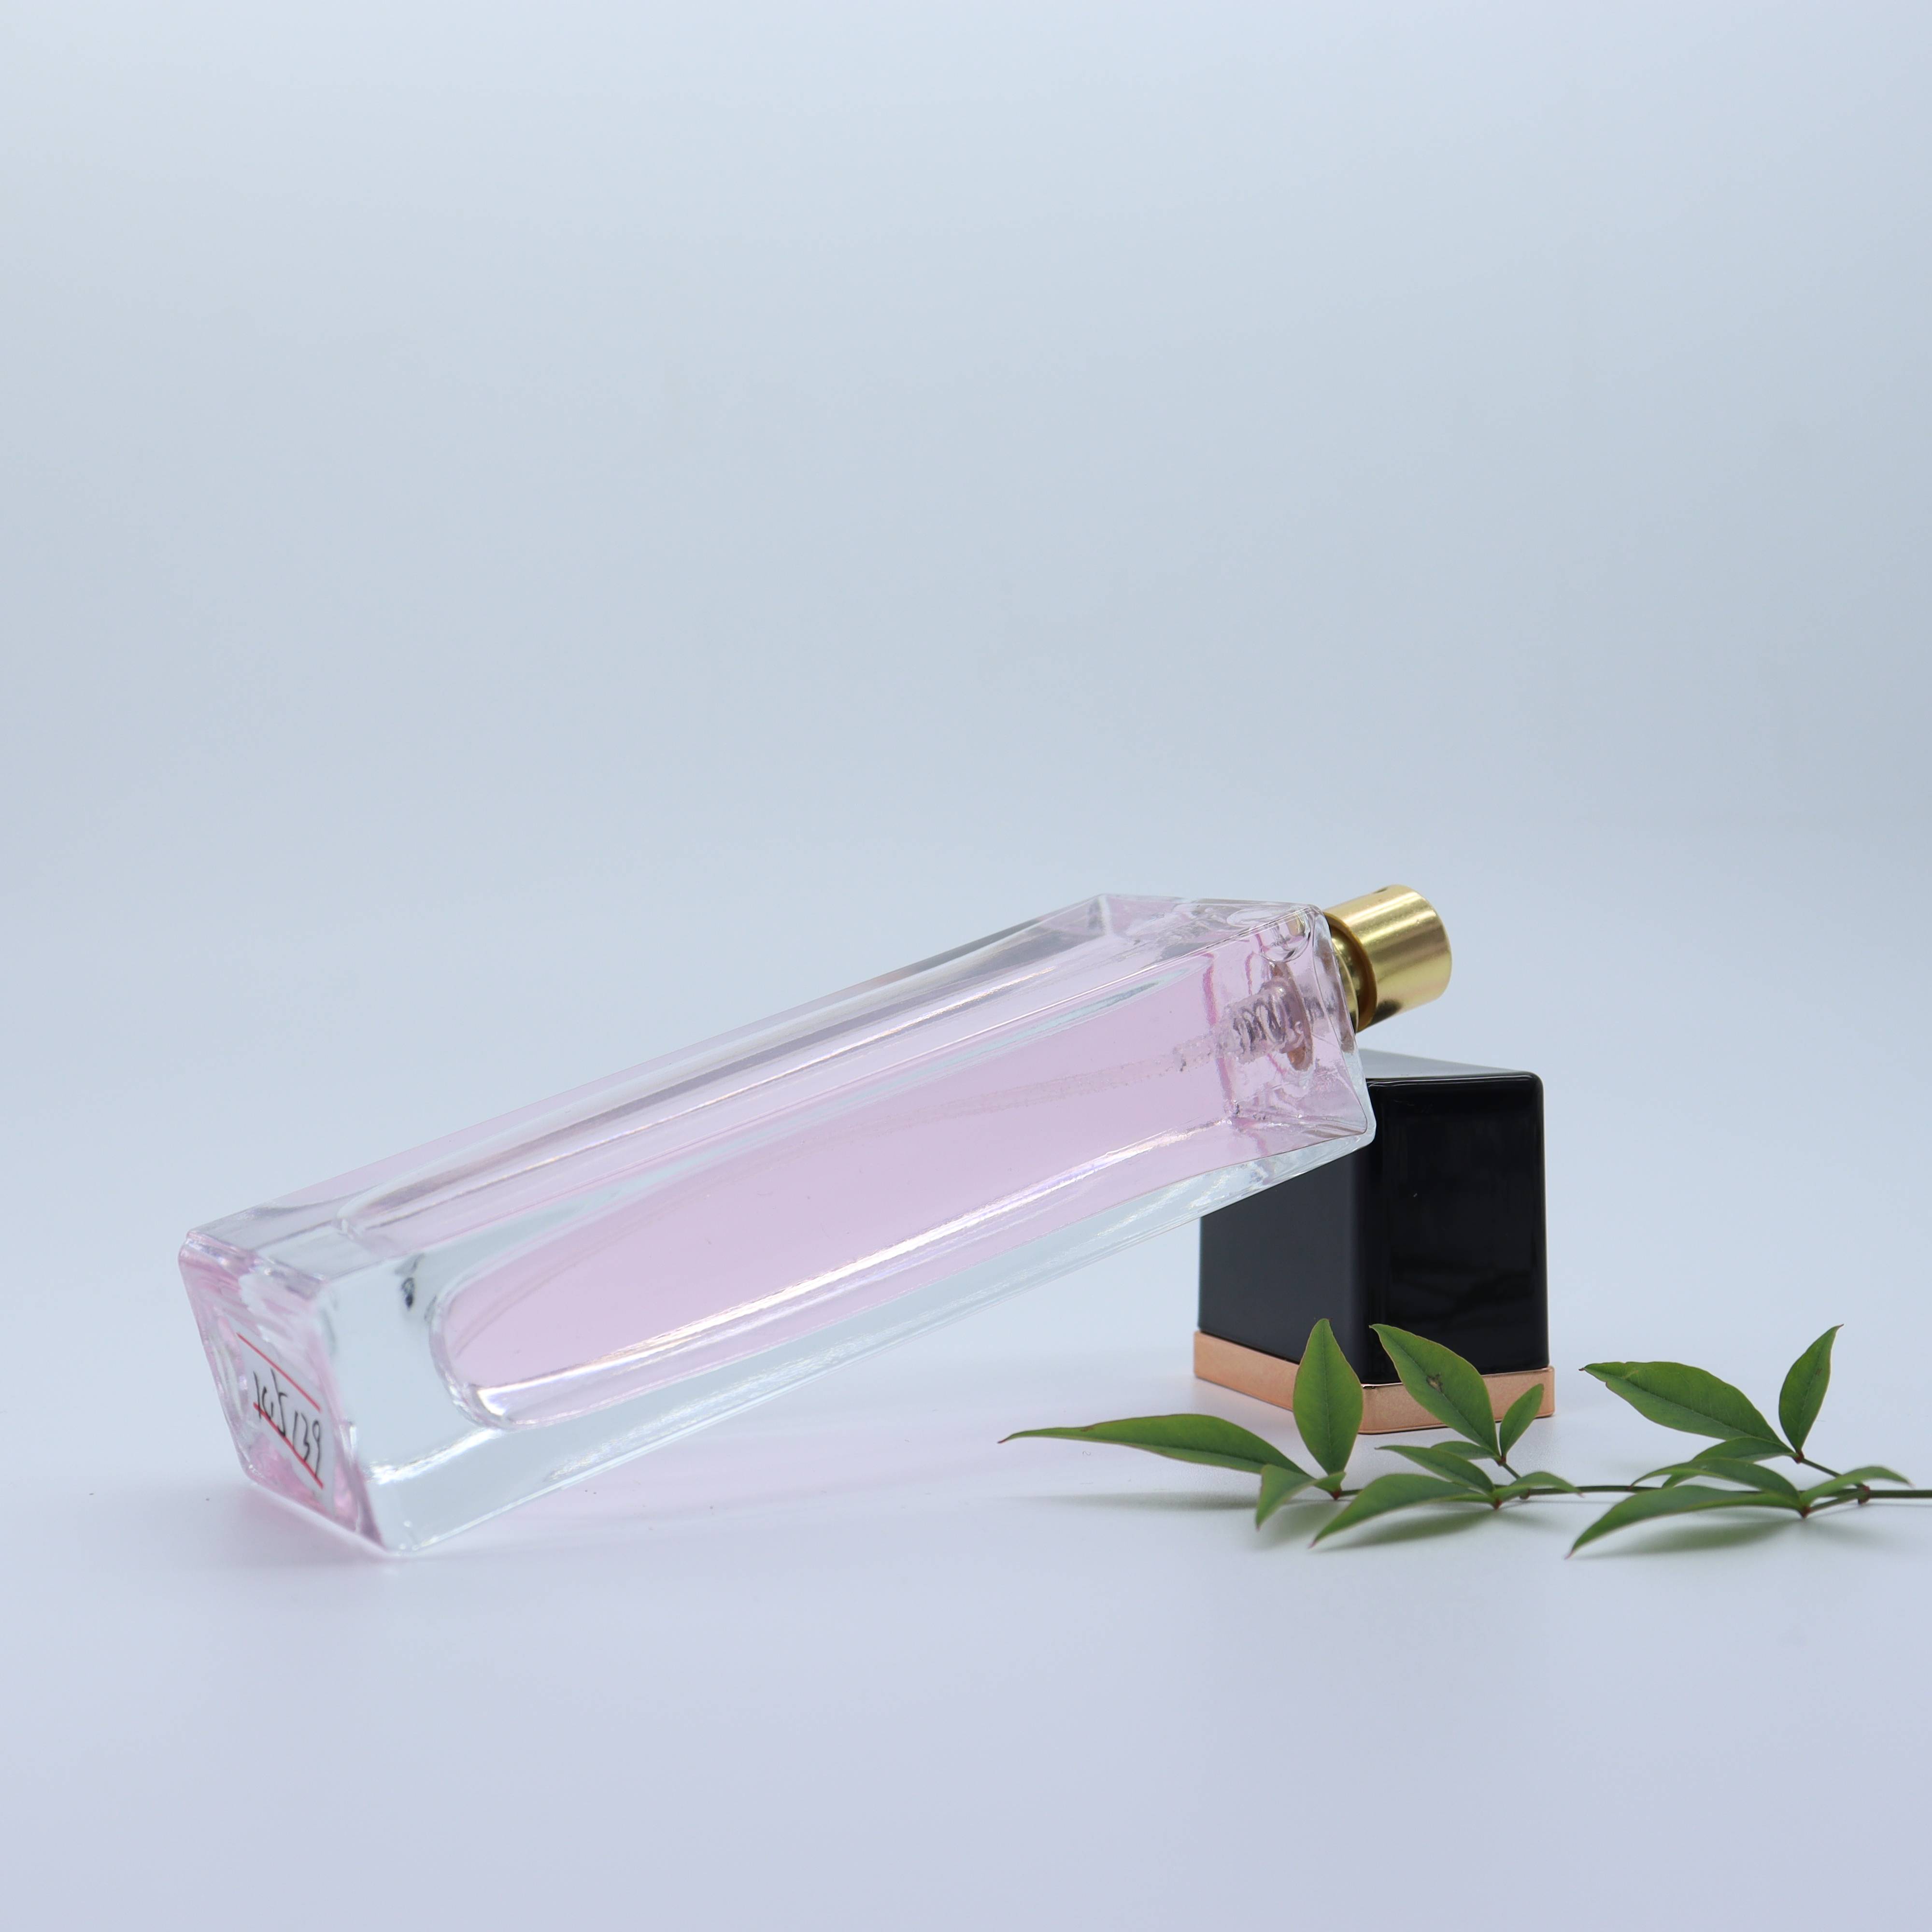 New type Clear glass cosmetic jar perfume bottle spray glass bottle with competitive price